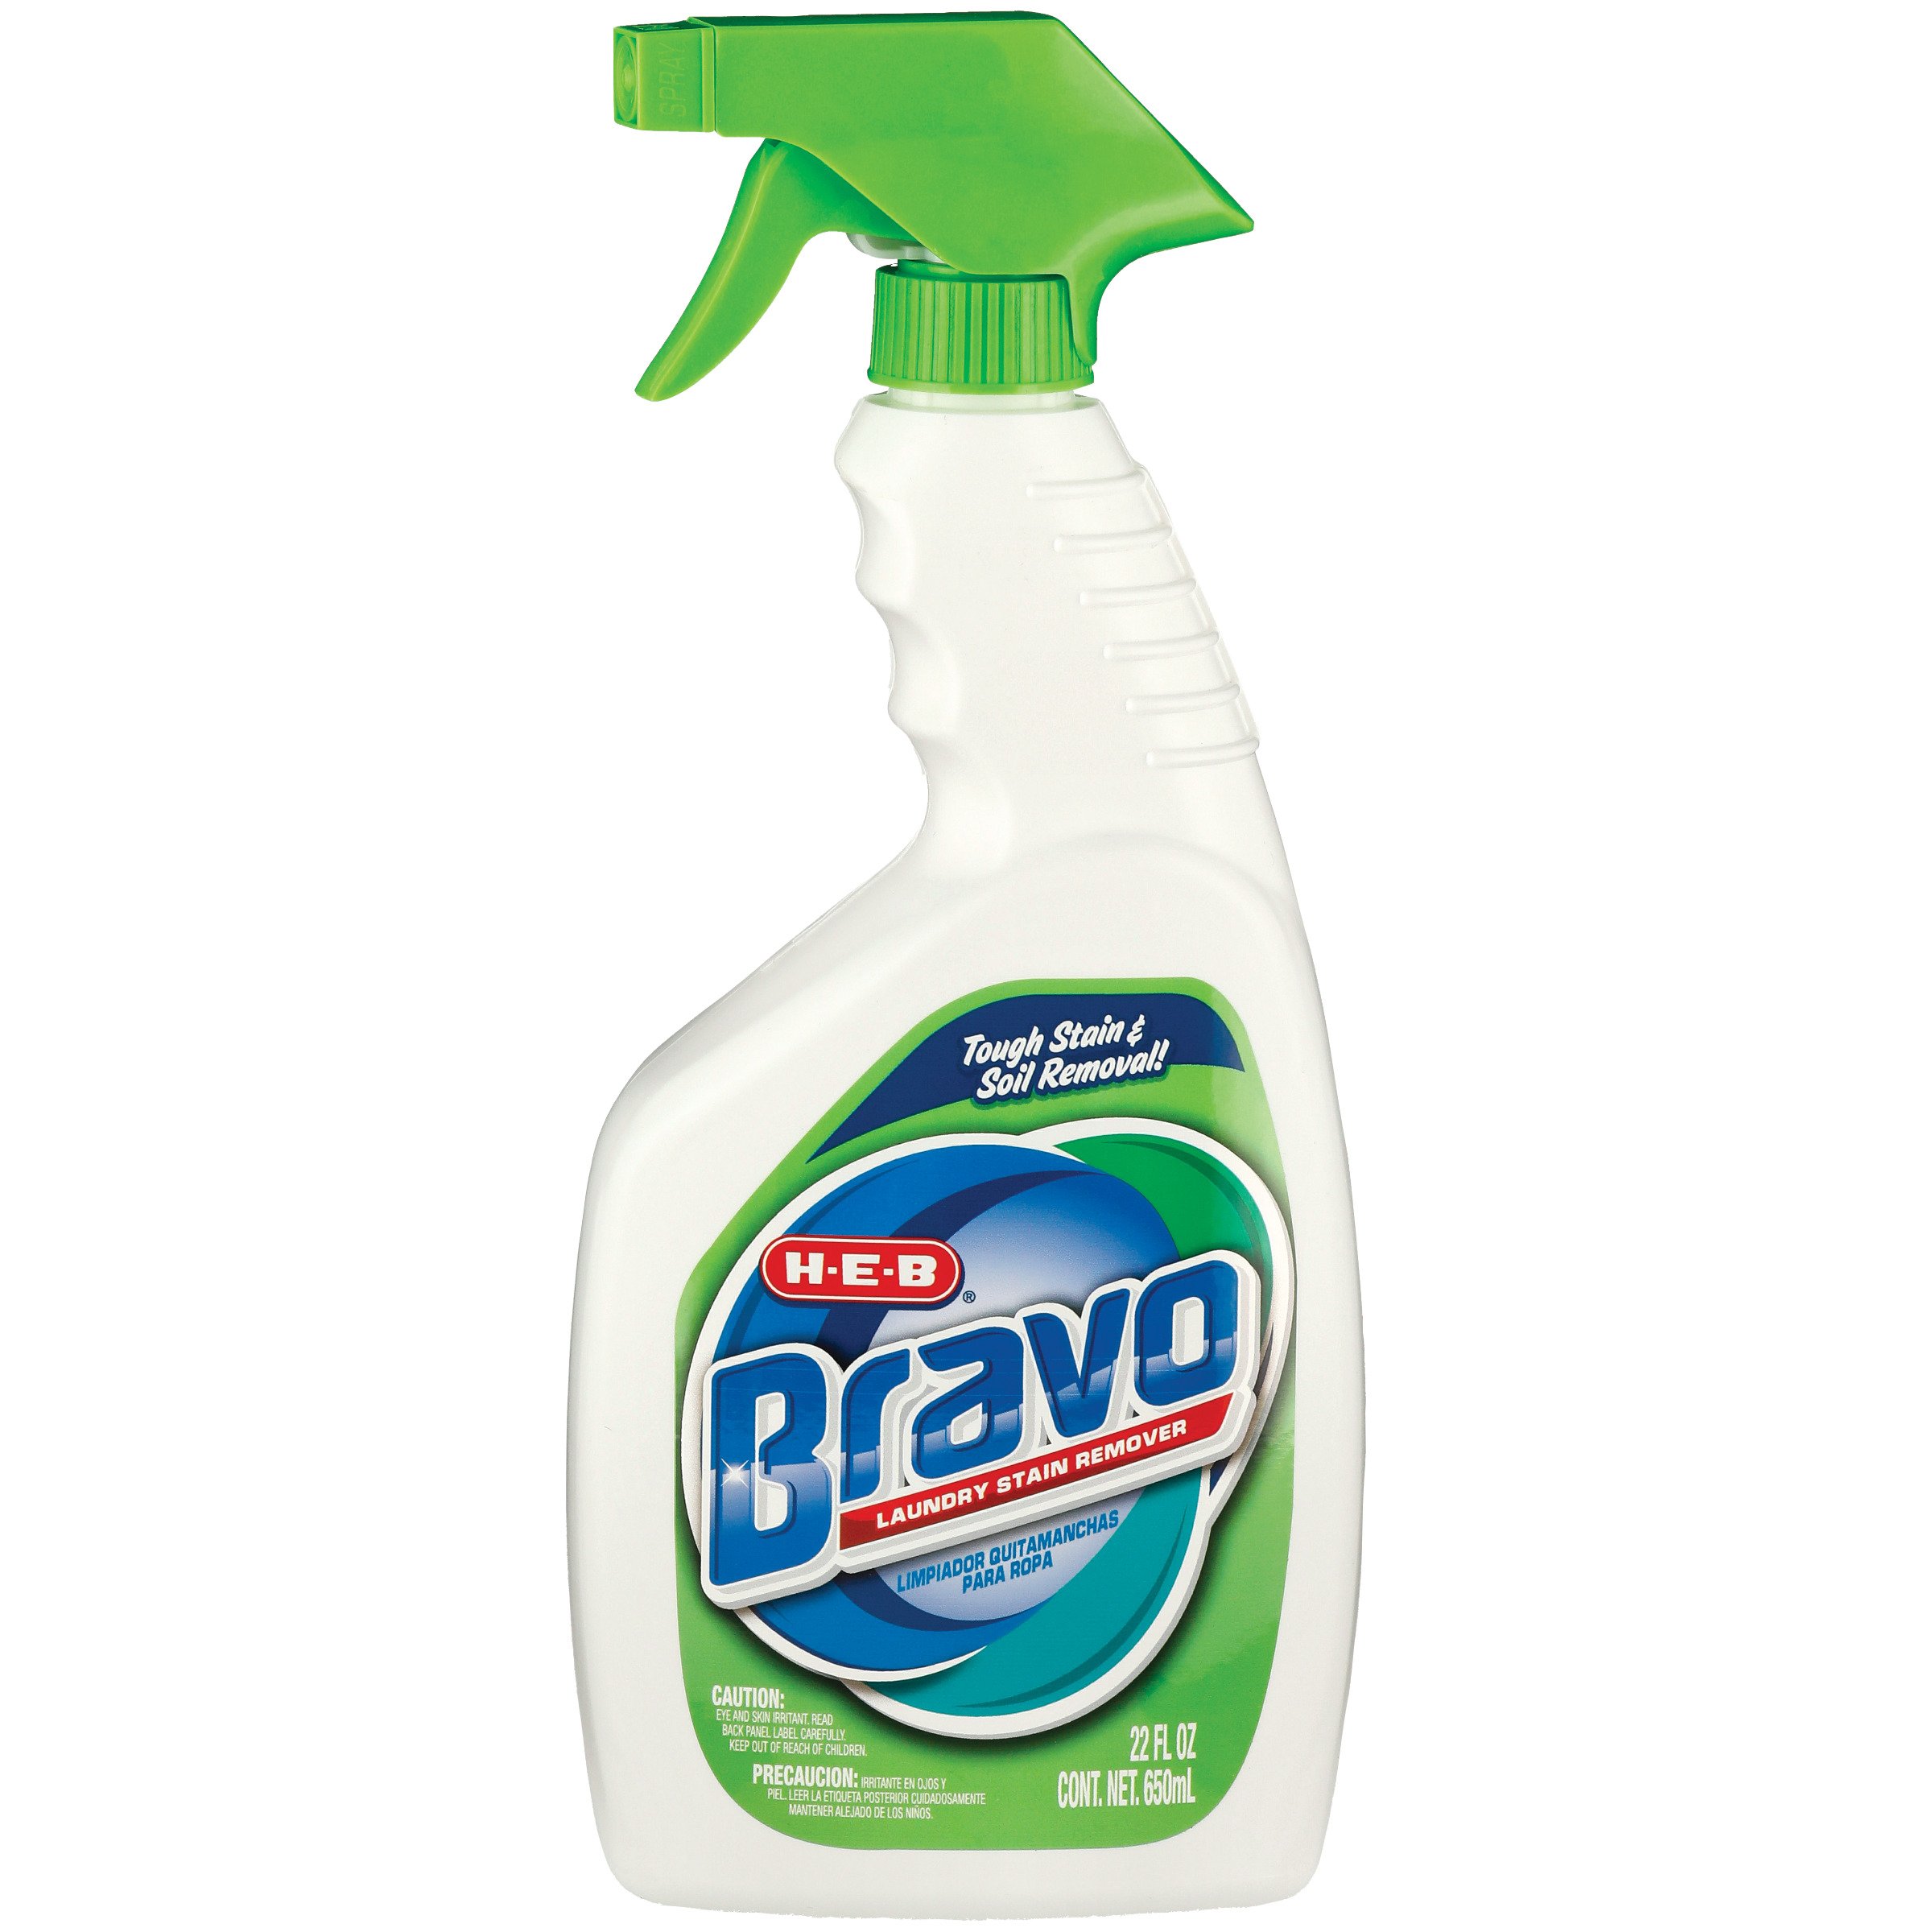 Spray 'n Wash Pre-Treat Laundry Stain Remover - Shop Stain Removers at H-E-B